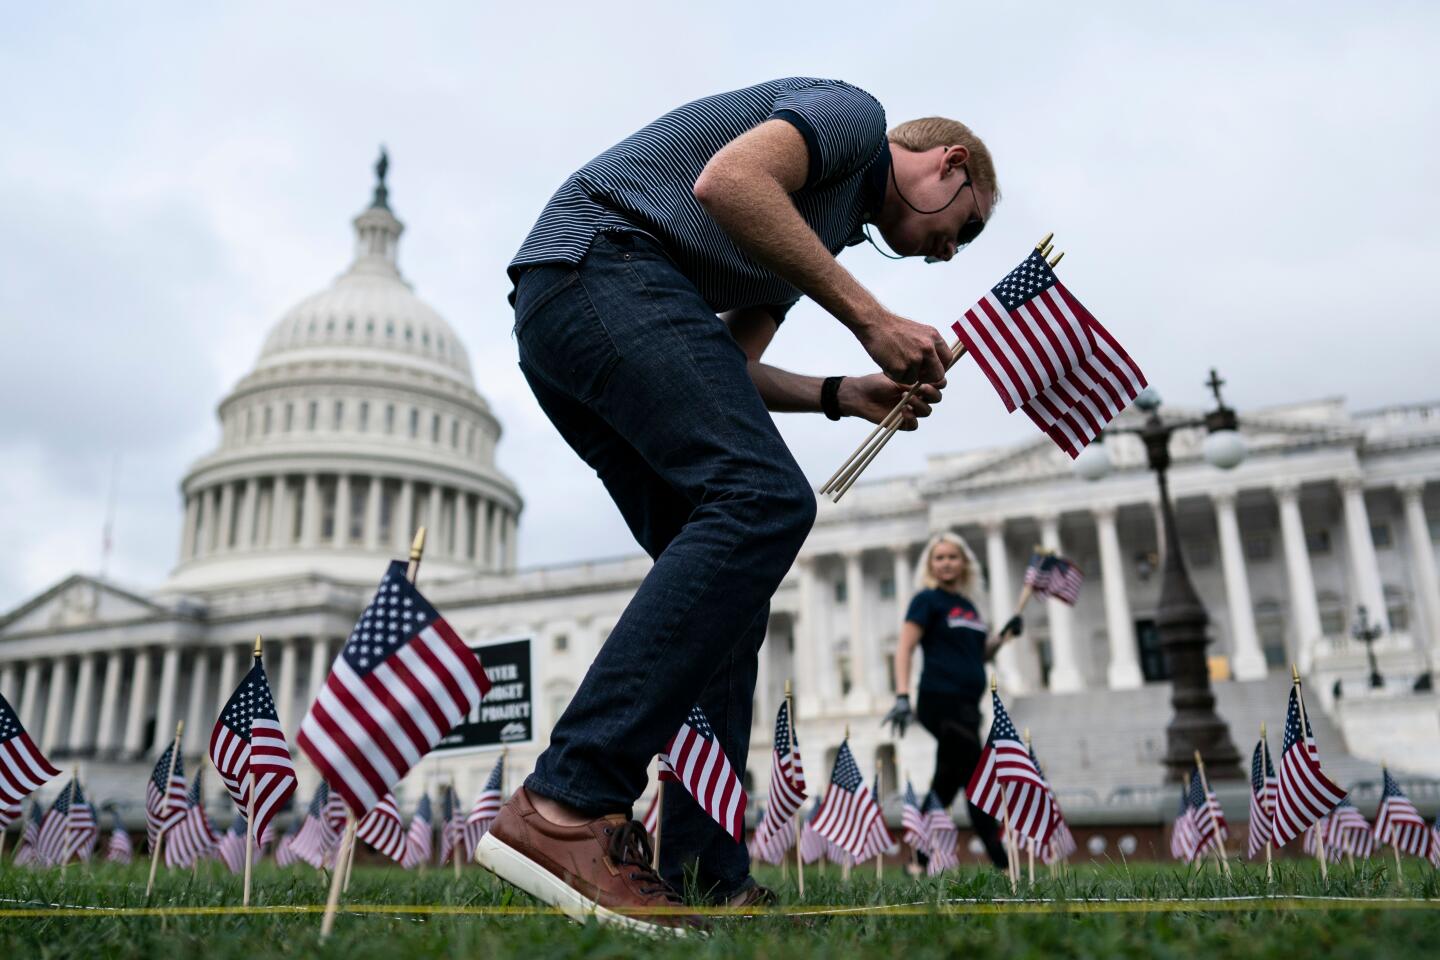 People place flags in the ground to honor the victims of the 9/11 attacks outside the U.S. Capitol